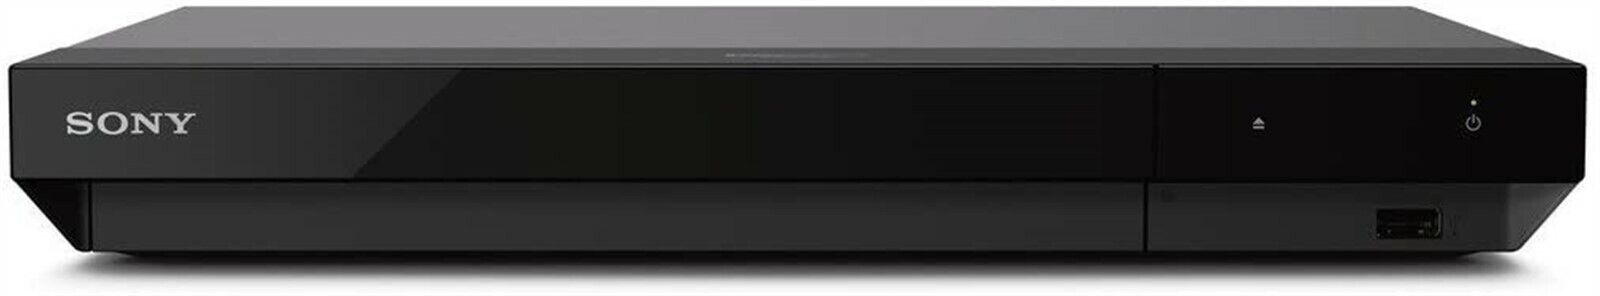 Sony UBP-X700 4K Ultra HD Home Theater Streaming Blu-Ray Player -READ-